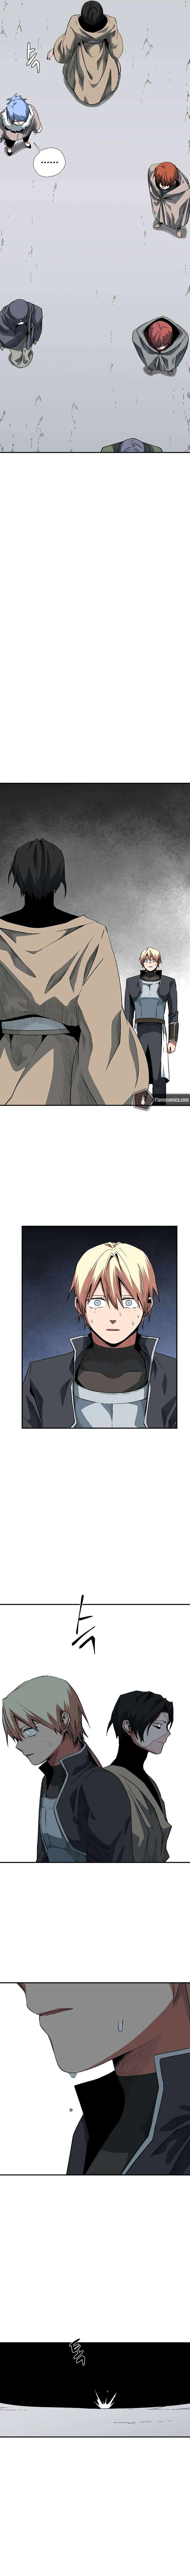 One Step to Being Dark Lord - chapter 156 - #5